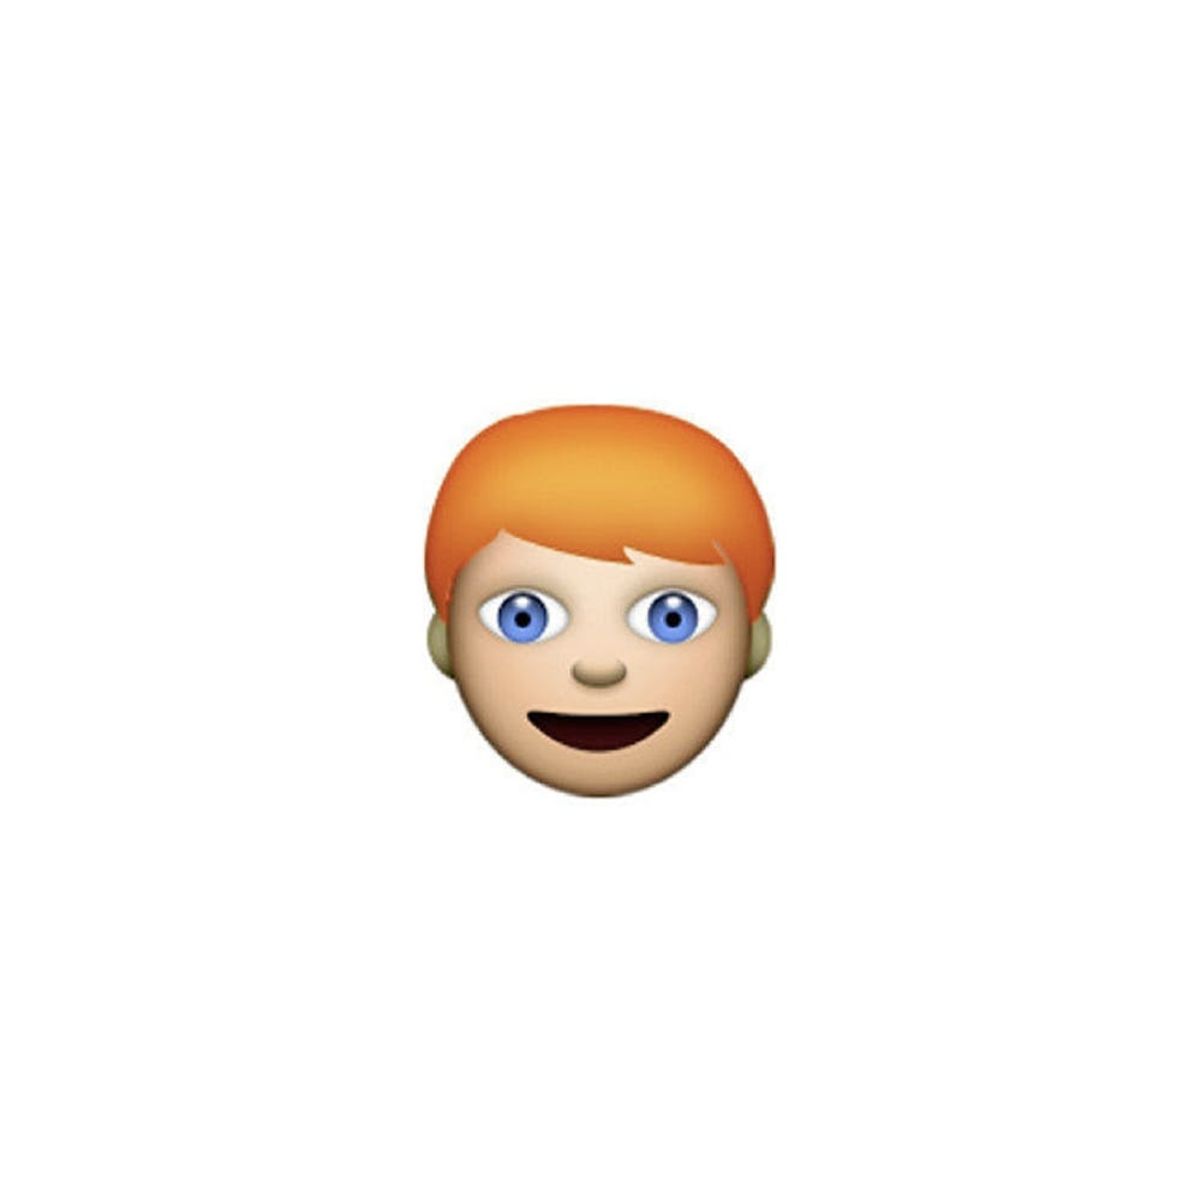 Will You Be Signing the Petition for a Redhead Emoji?